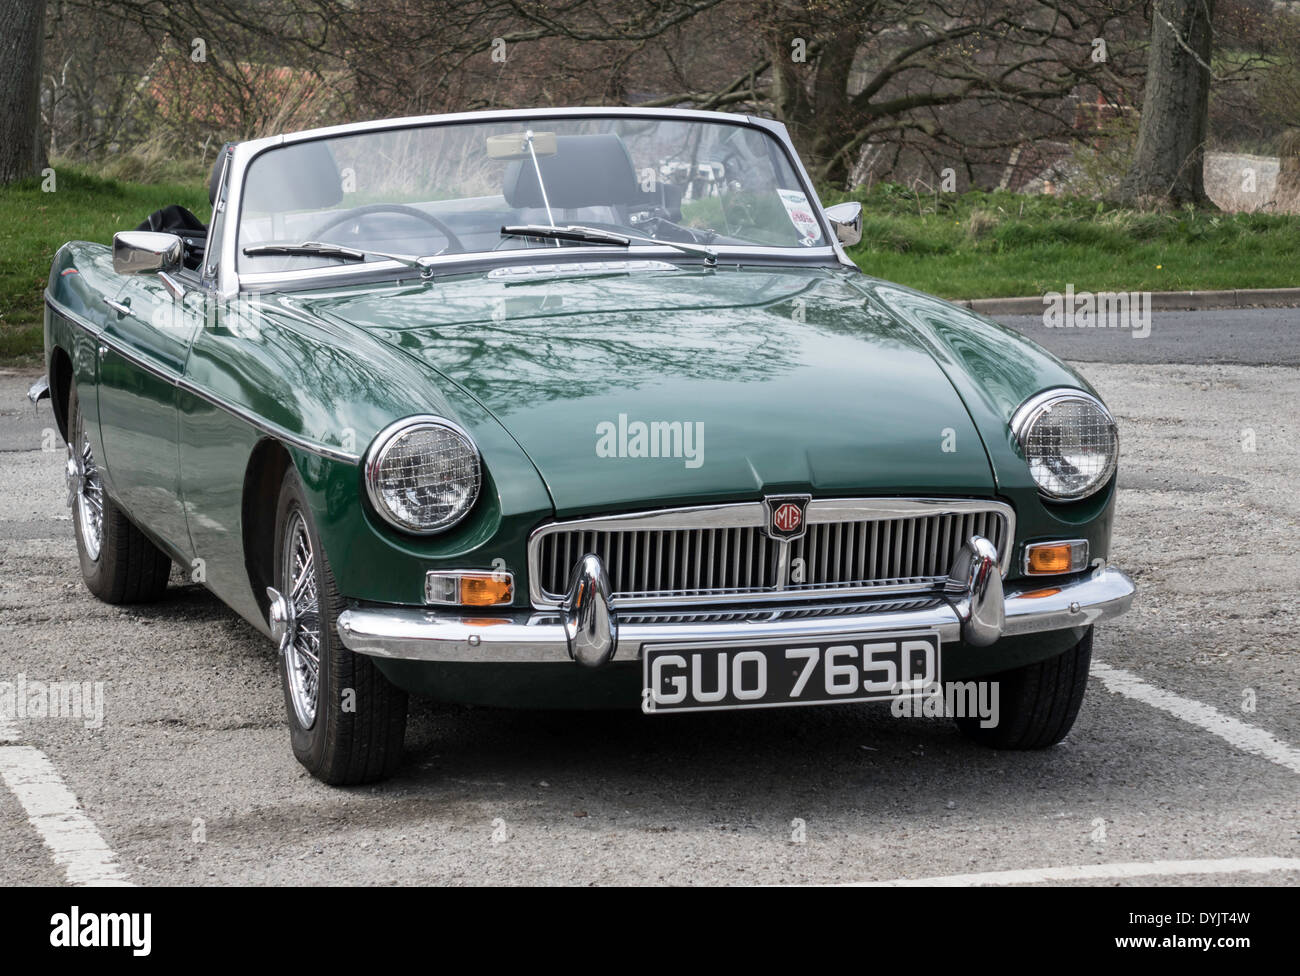 A classic British Racing Green 1966 MG-B roadster sports car in North Yorkshire England UK Stock Photo